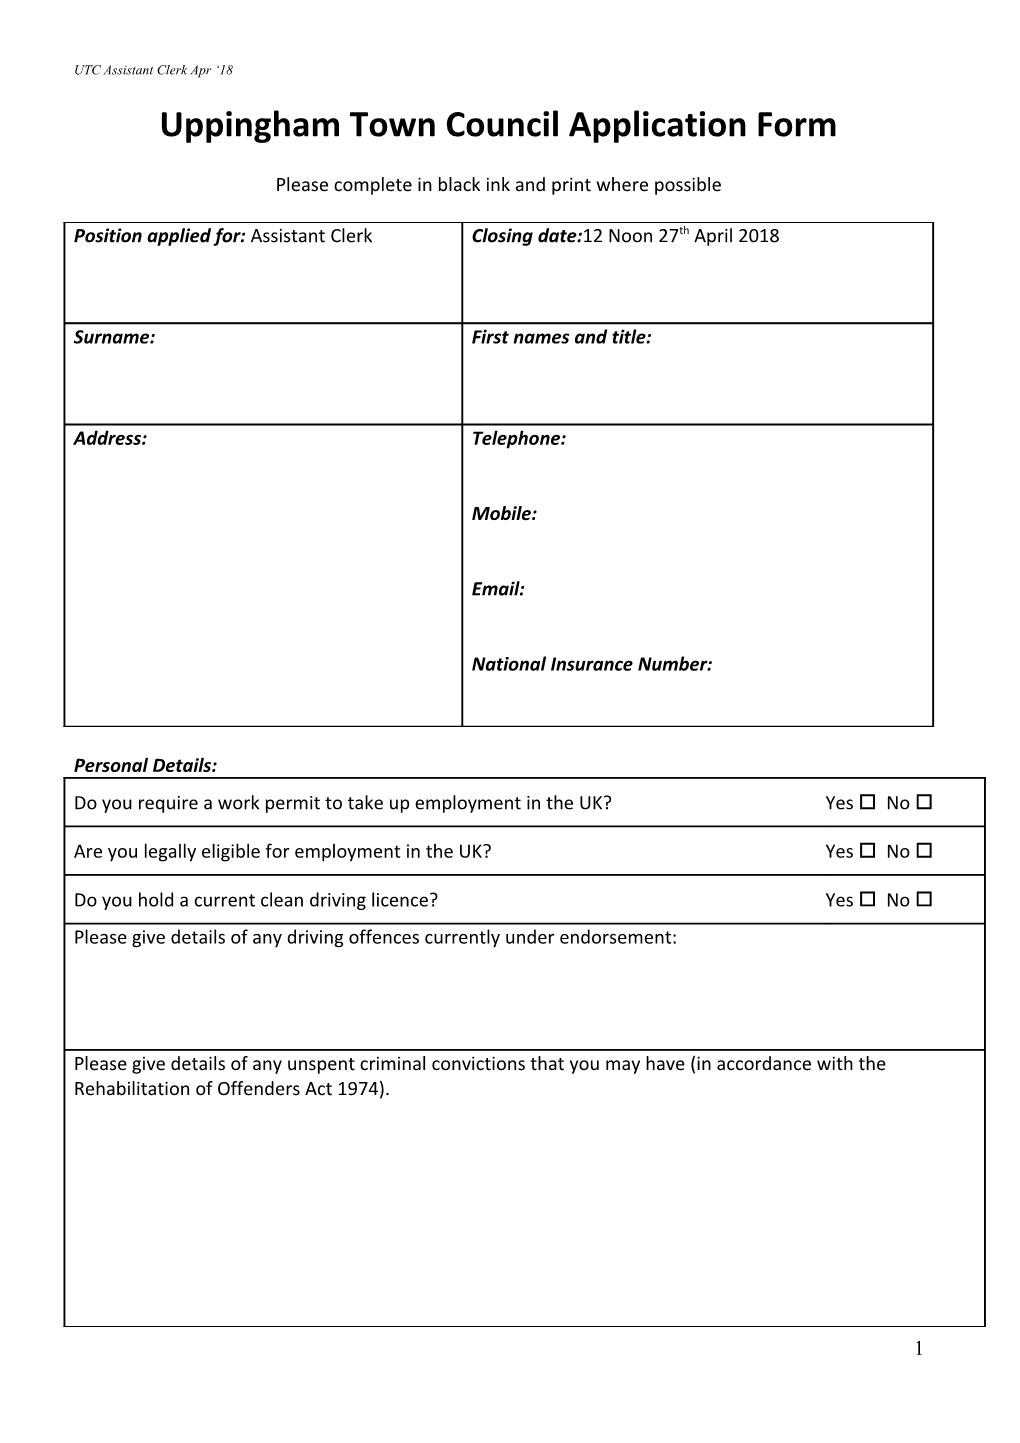 Uppingham Town Council Application Form